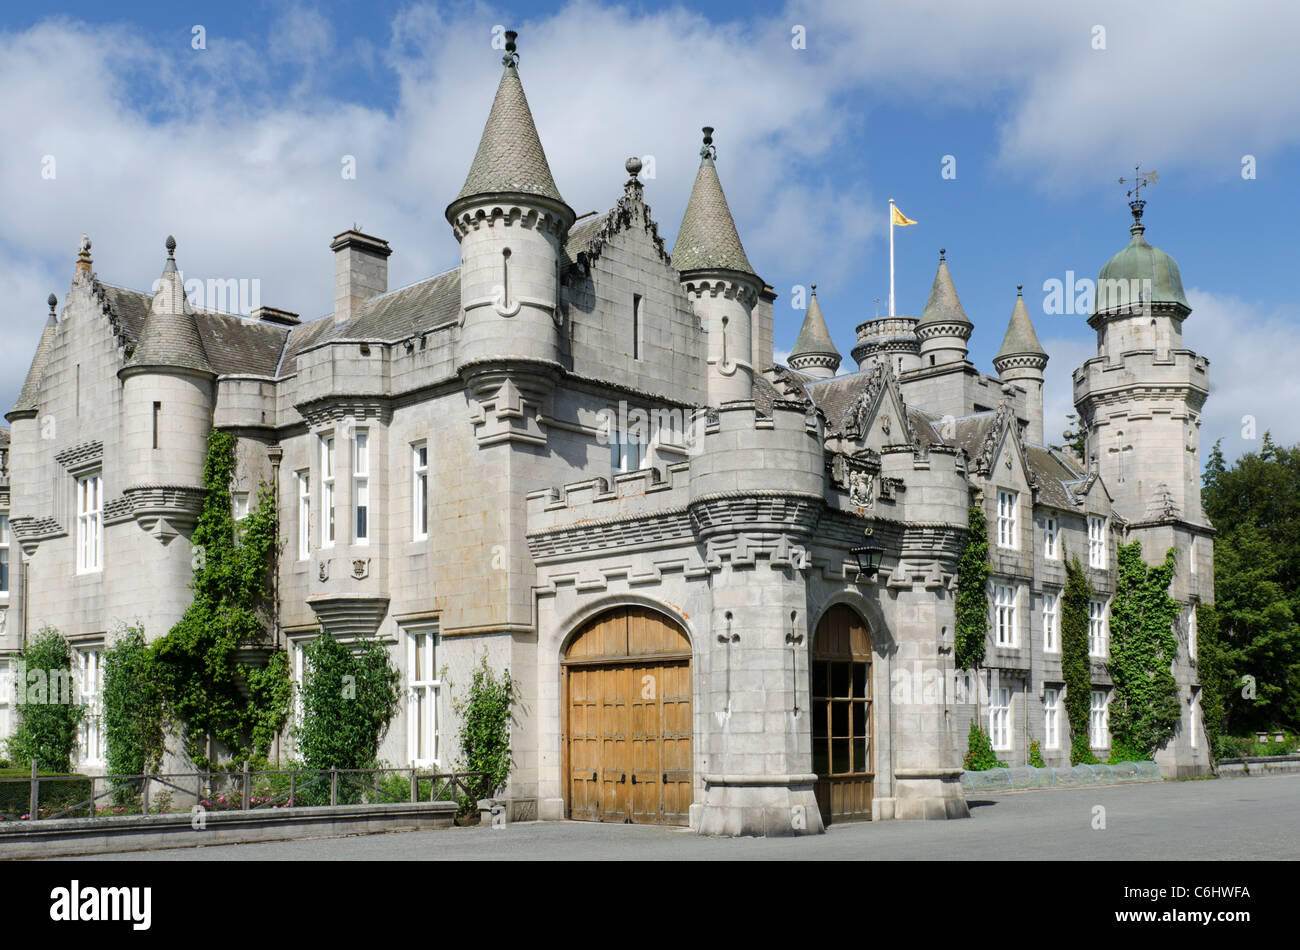 Balmoral Castle Royal Deeside -  Queen's residence view of castle and turrets from front door Stock Photo